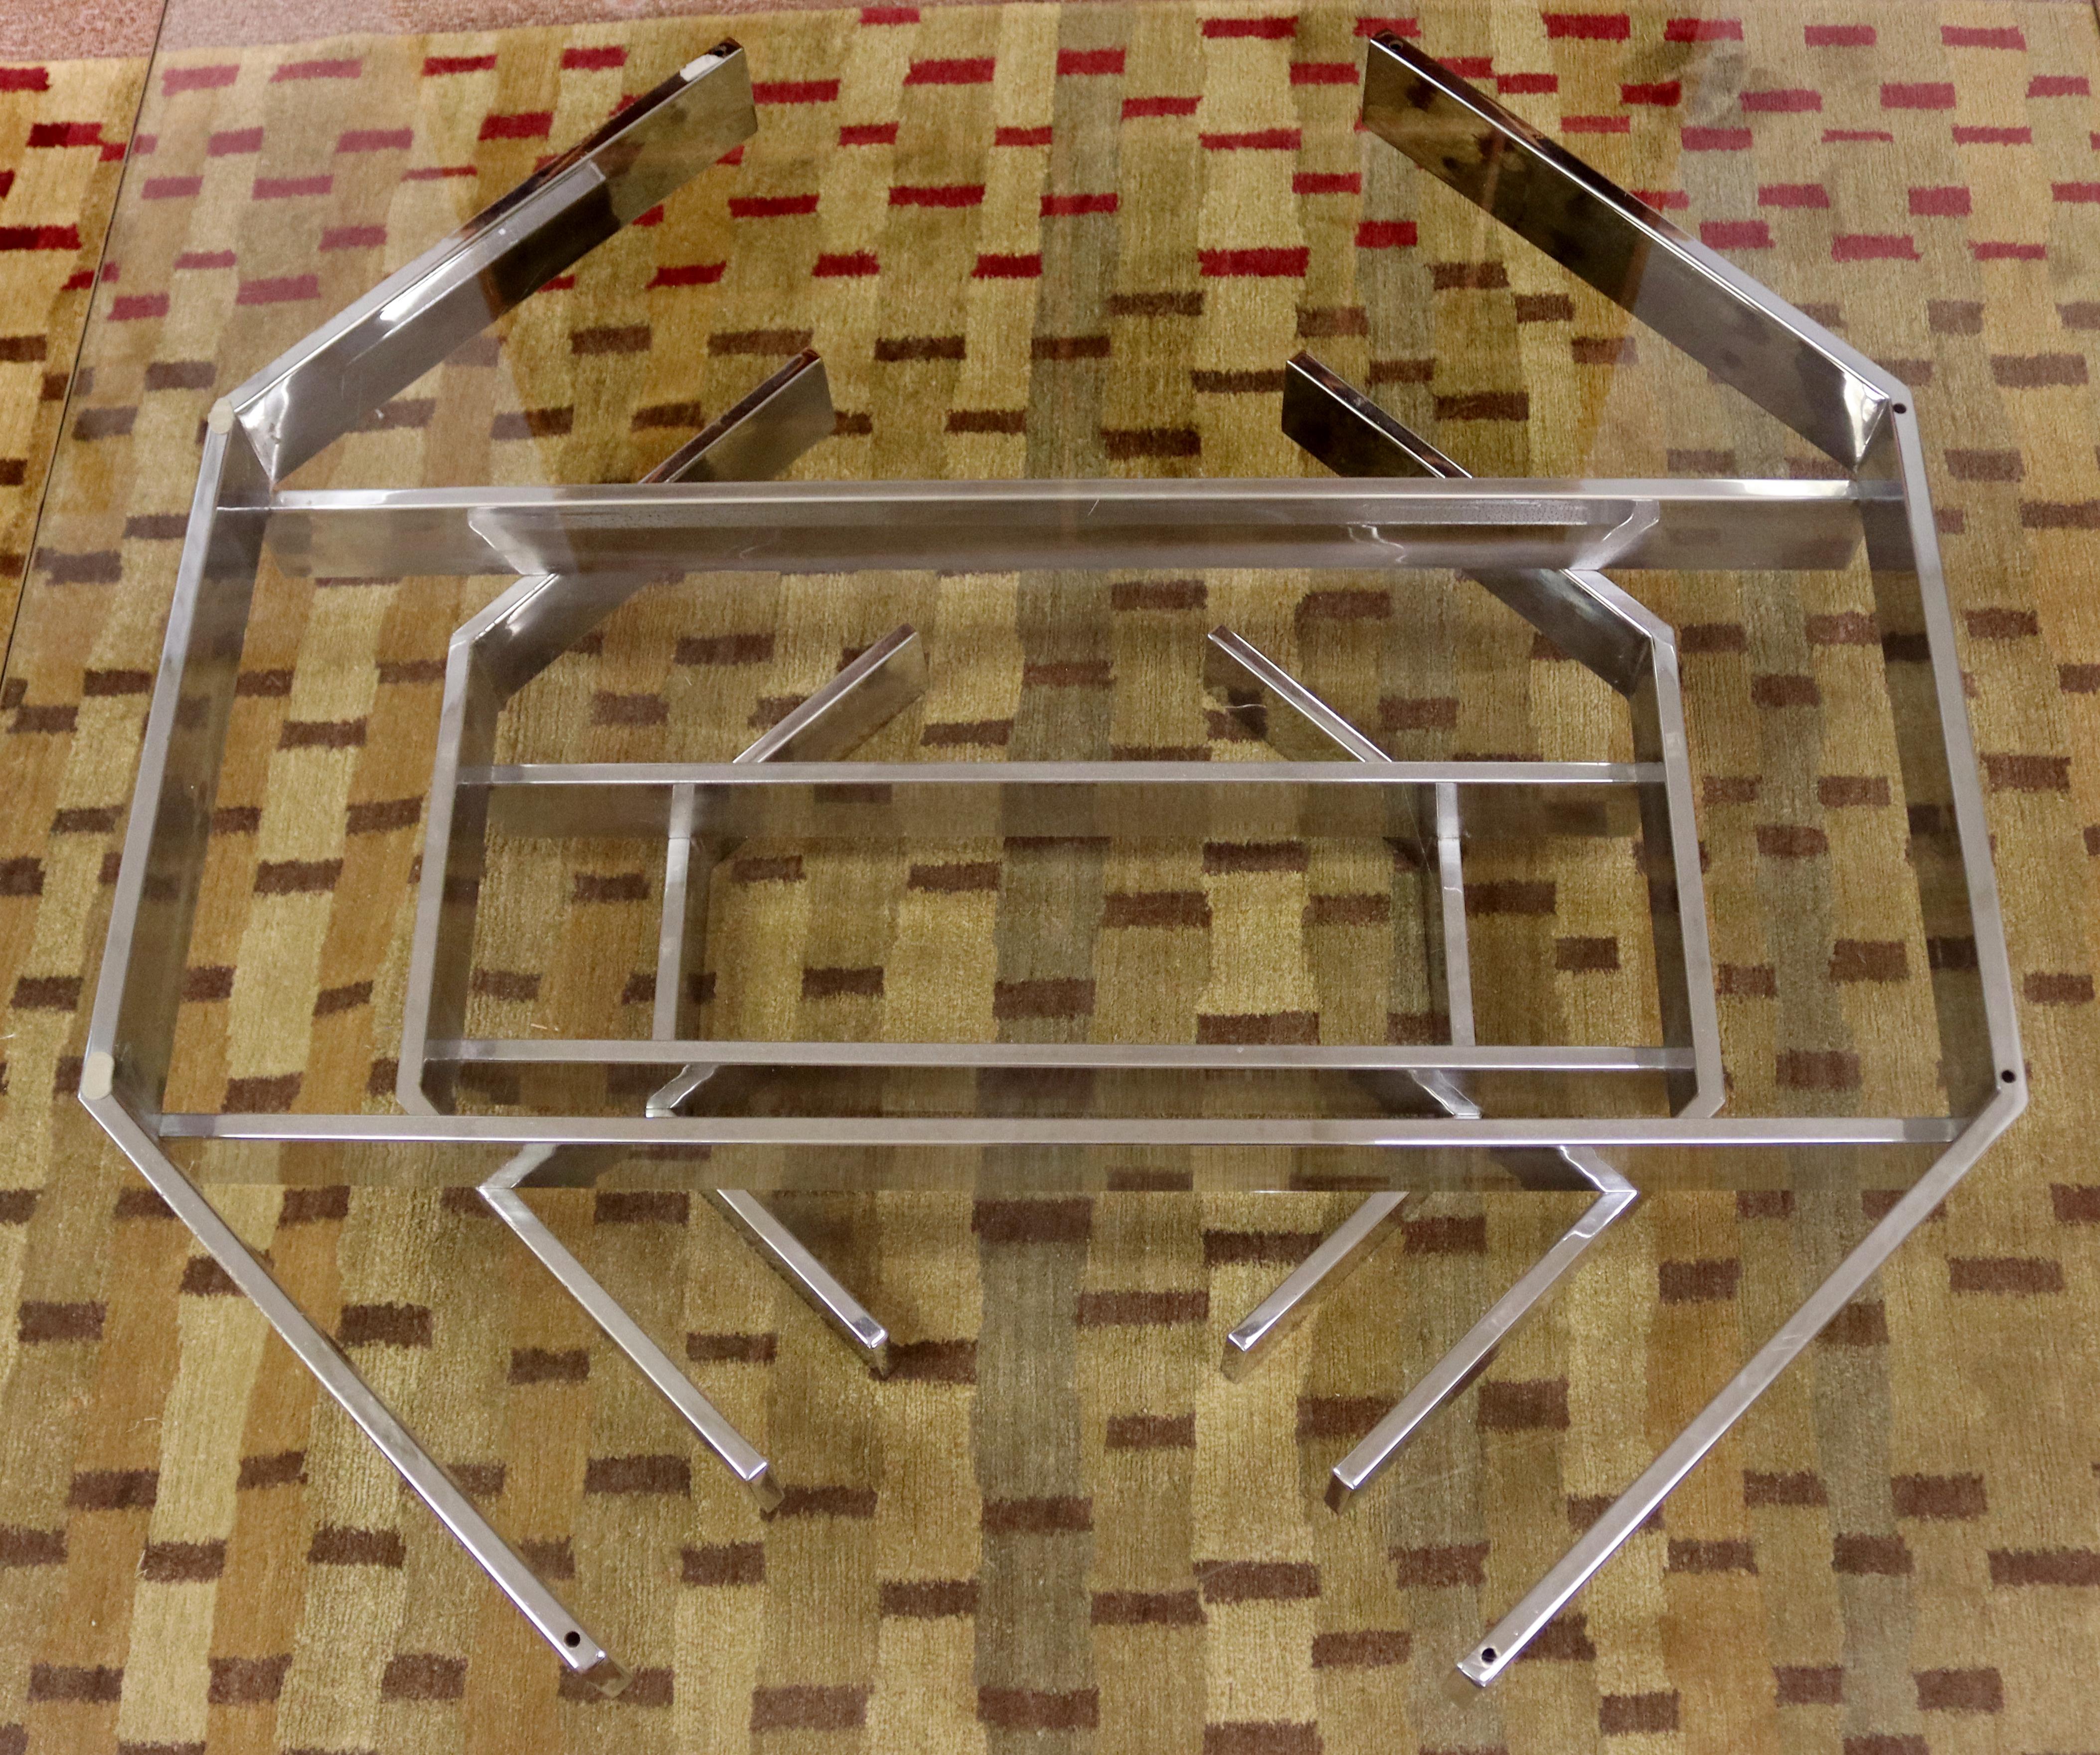 For your consideration is a gorgeous coffee table, with a glass top on a geometric shaped chrome base, by Paul Mayen, circa the 1960s. In excellent vintage condition, with a couple of surface scratches on the glass. The dimensions are 40